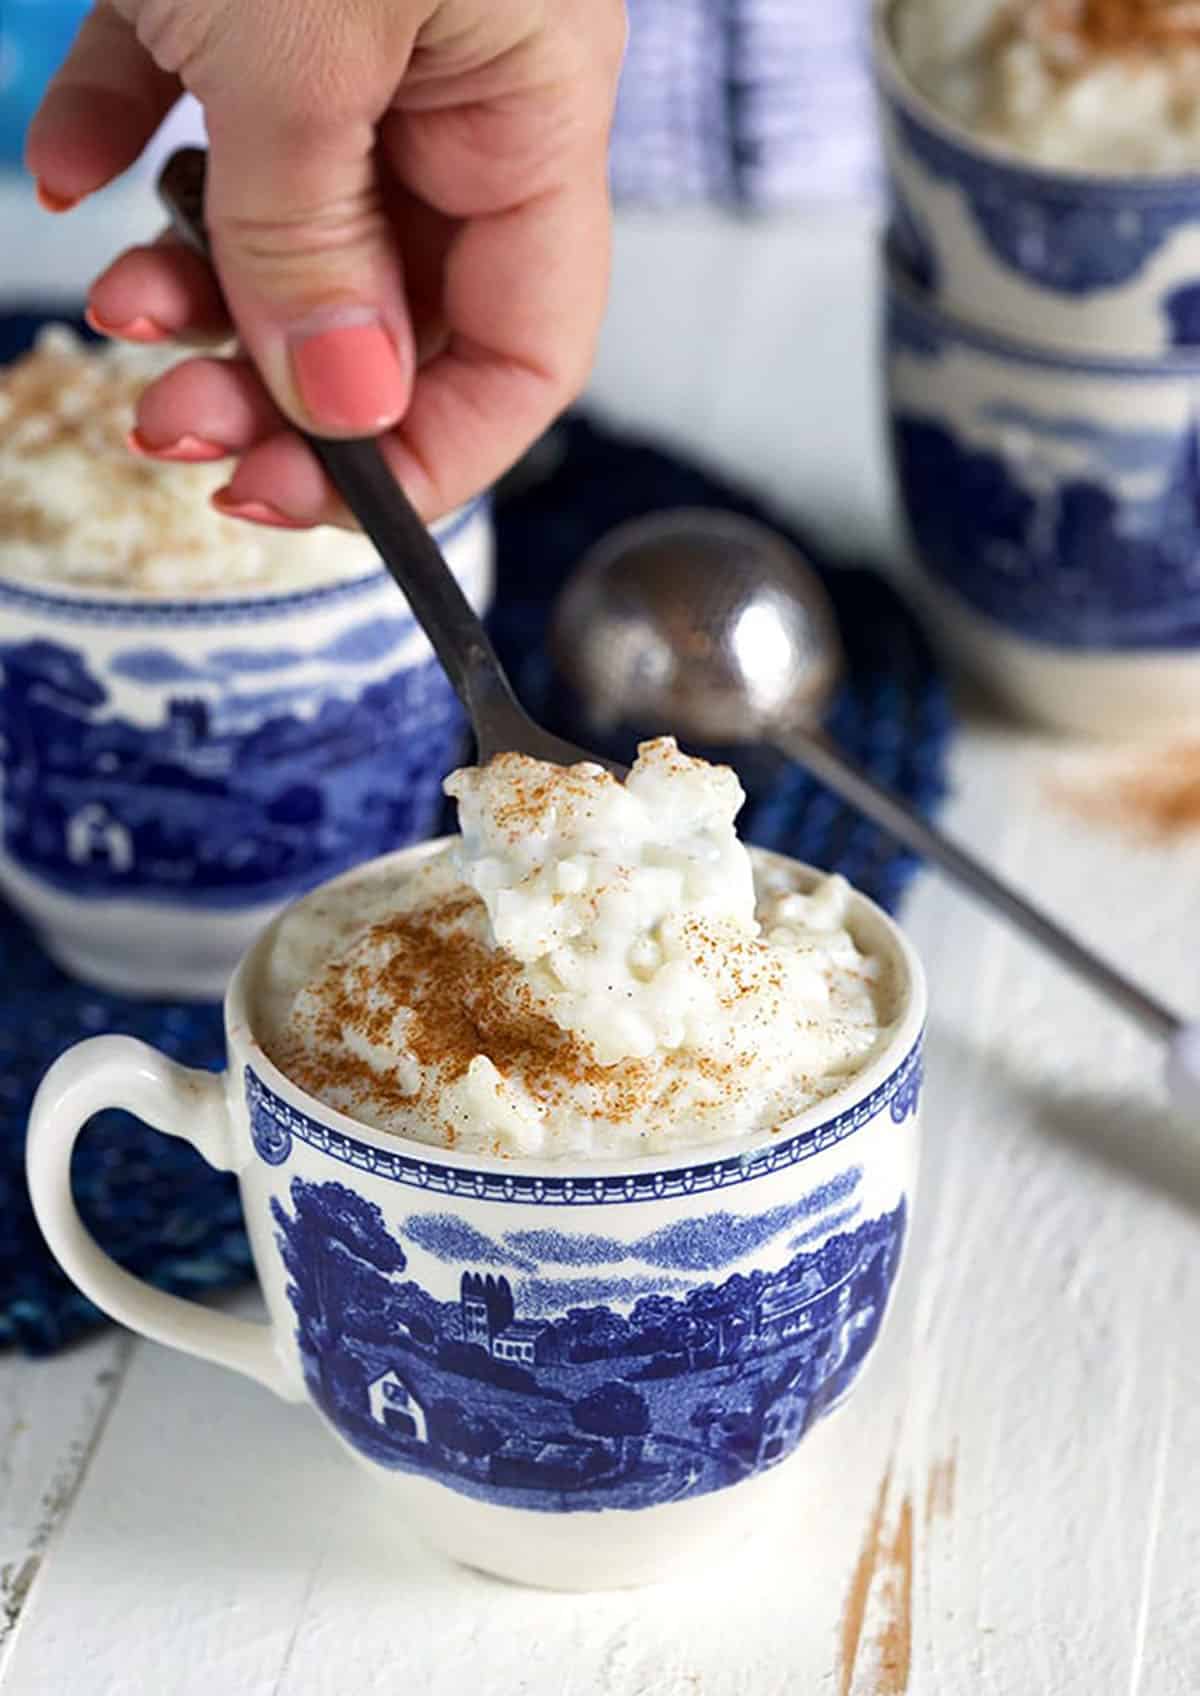 rice pudding in a blue and white mug with a spoon digging into it.